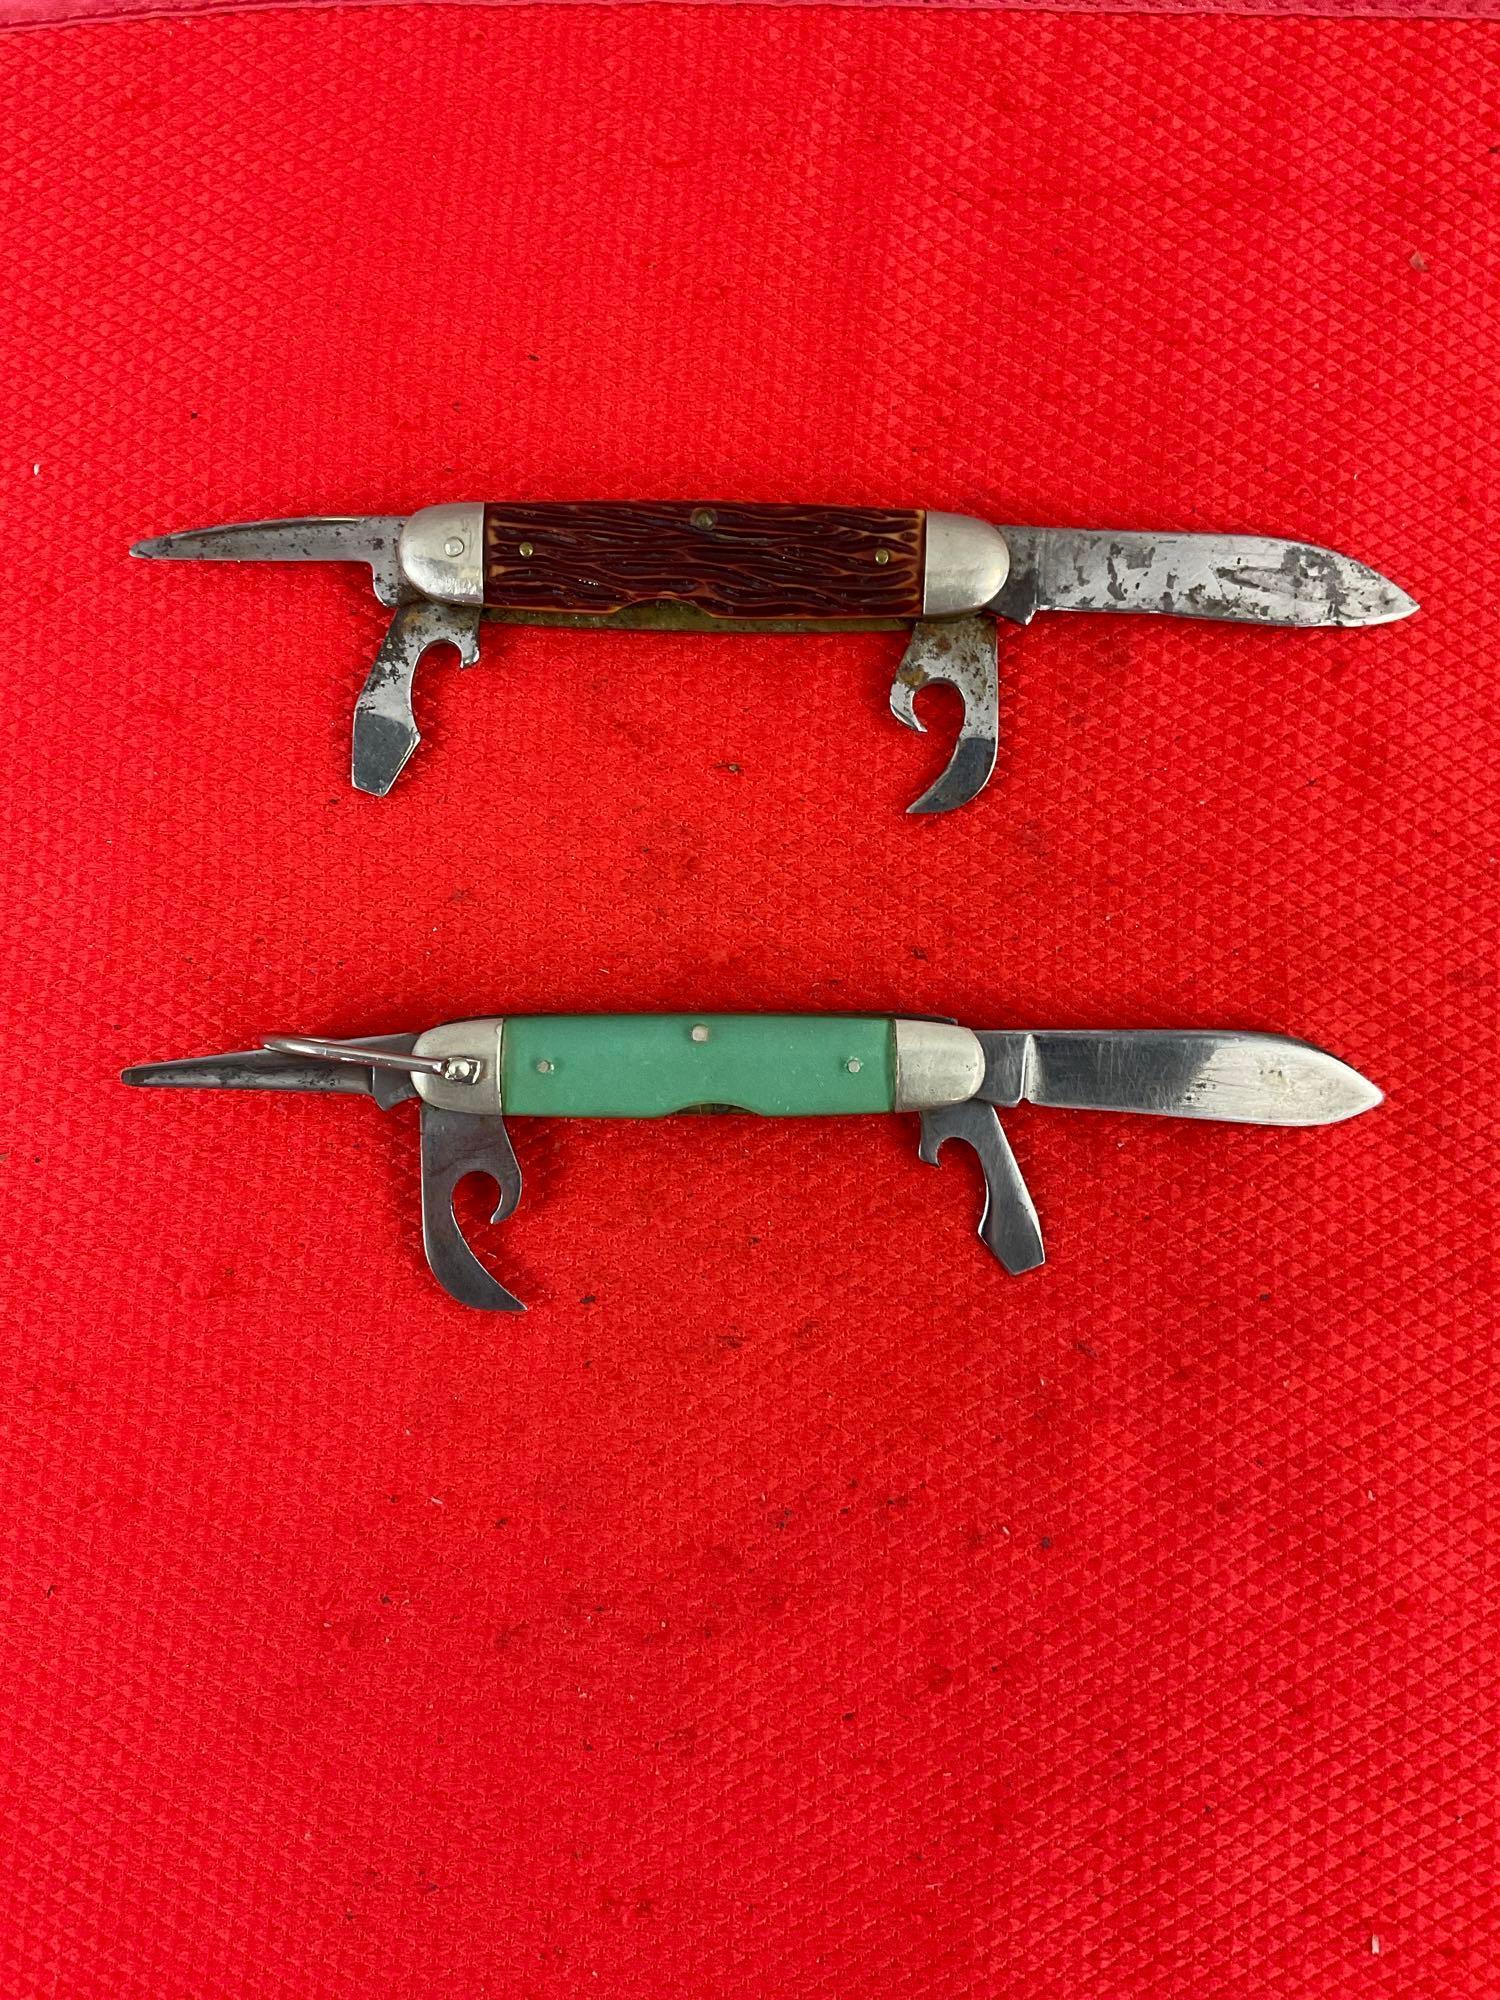 2 pcs Vintage Steel Folding 4-Blade Scout Utility Pocket Knives. 1x Imperial, 1x Kutmaster. See